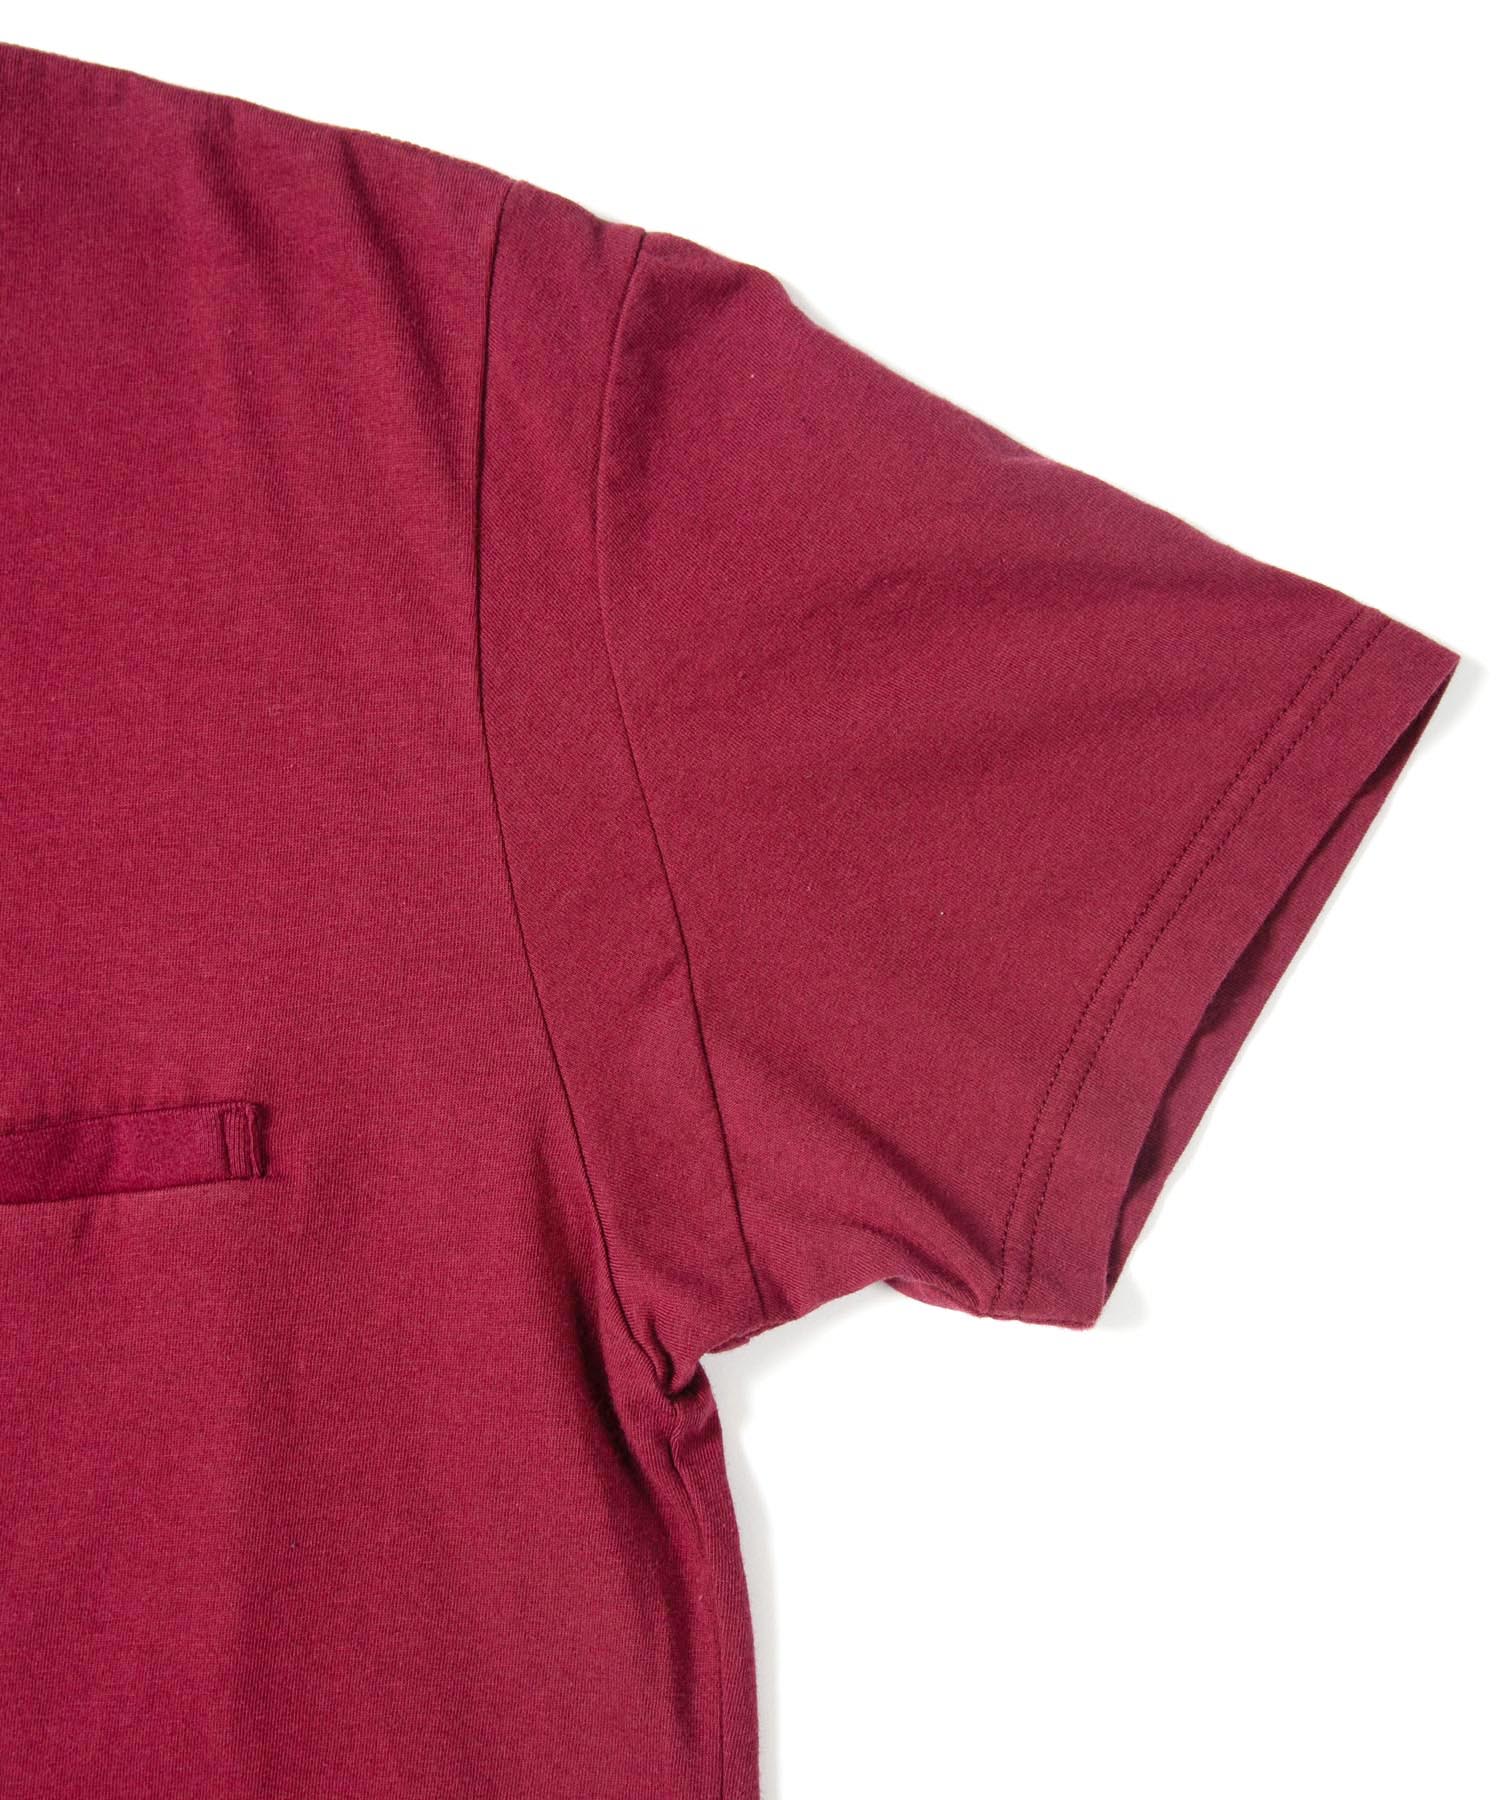 Load image into Gallery viewer, Natural Soft Cotton Crew Neck T-shirt - WINE